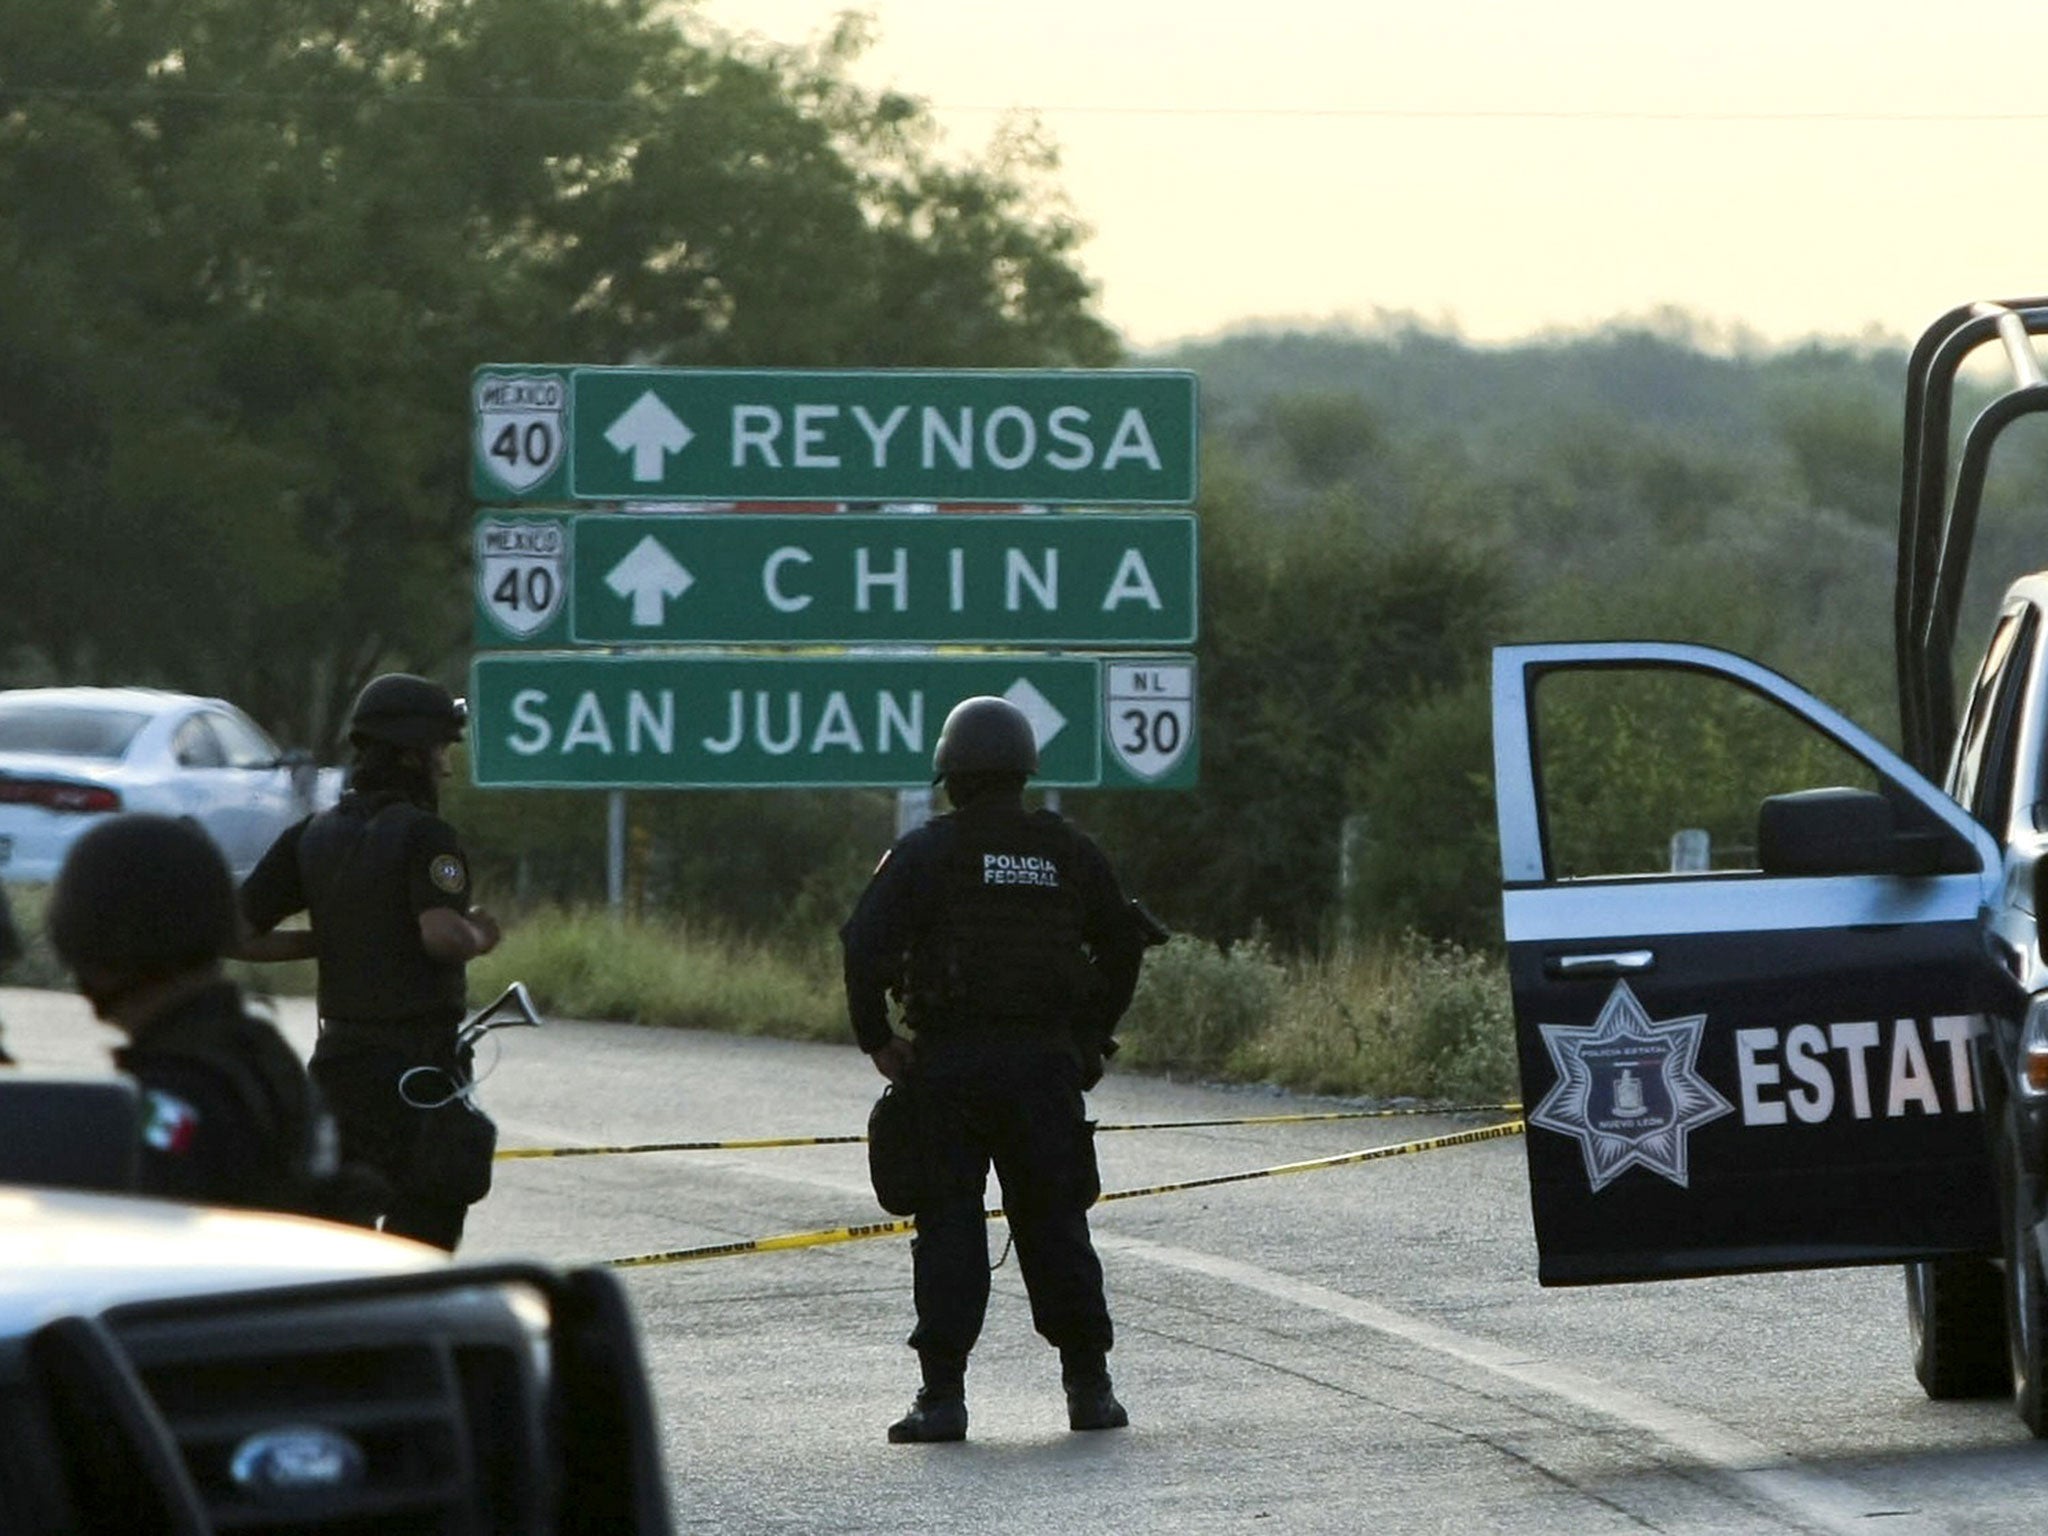 Mexican authorities are now investigating the incident, which took place in the northern city of Reynosa on the Texas border